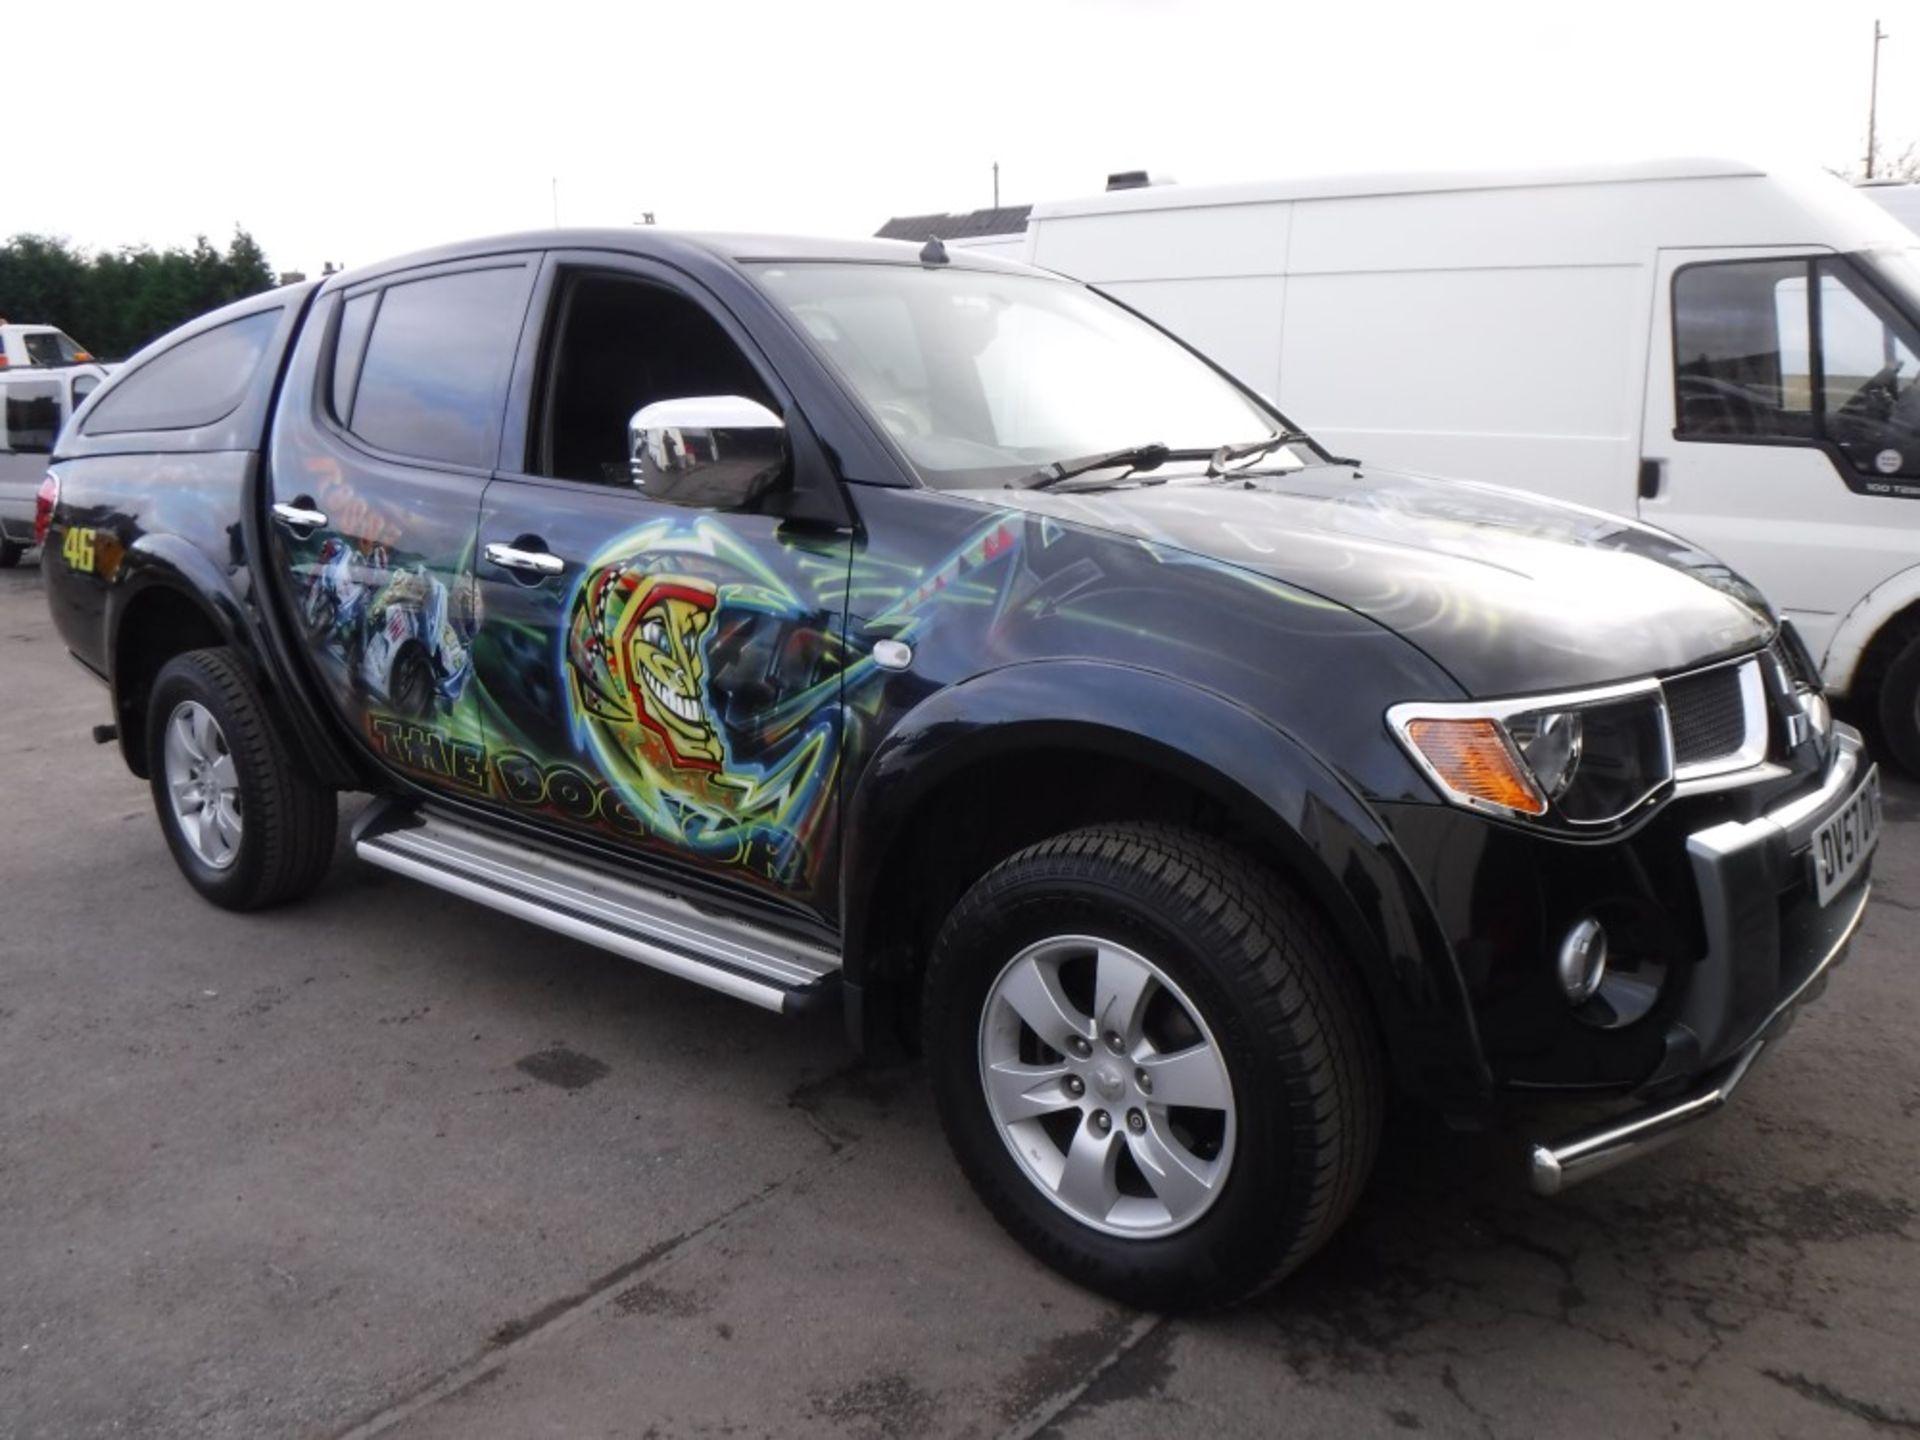 57 reg MITSUBISHI L200 ANIMAL DI-D D/C PICKUP WITH CUSTOMISED VALENTINO ROSSI AIR BRUSHED PAINTWORK,